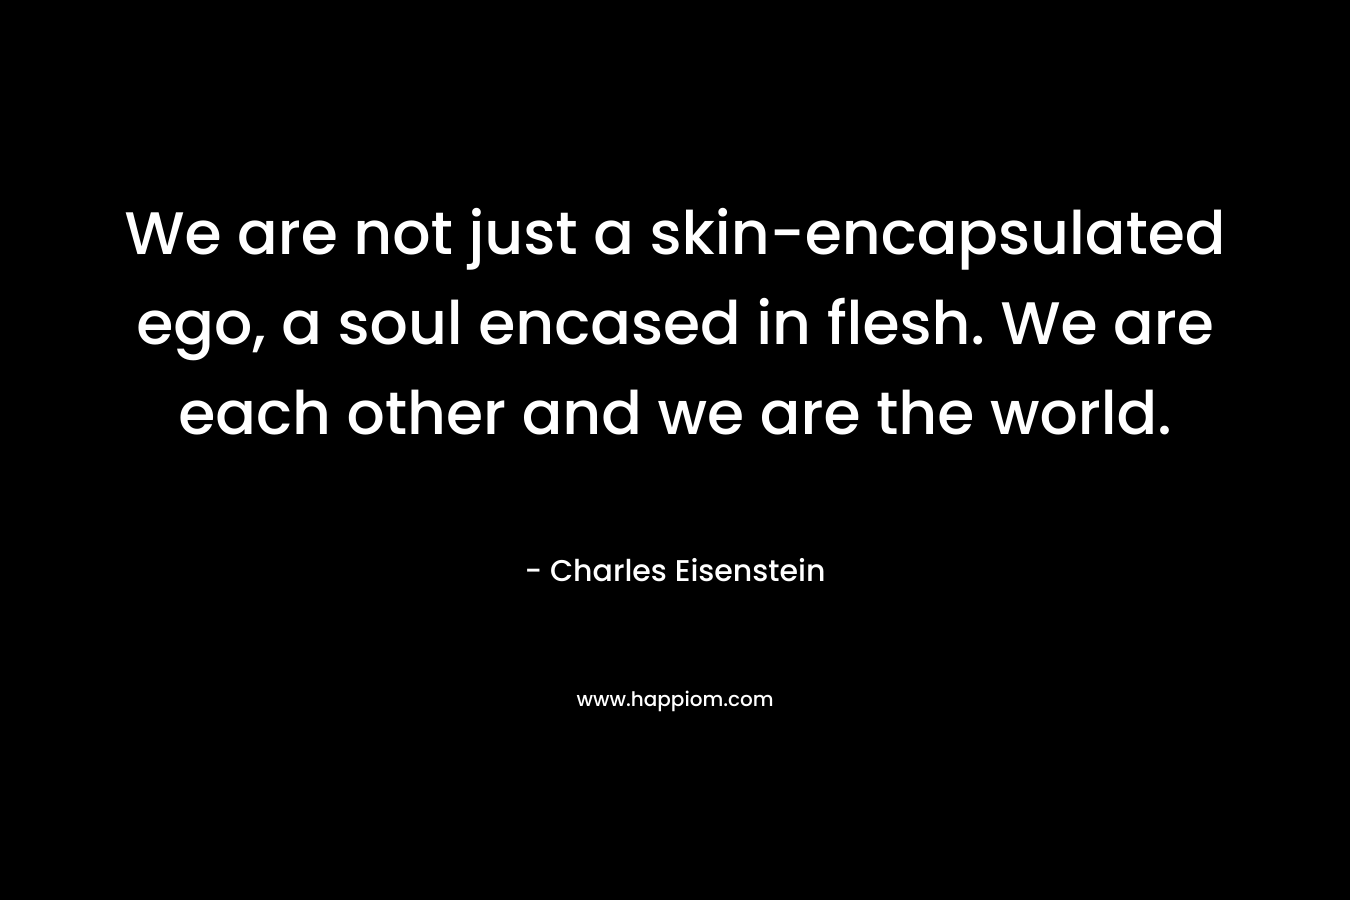 We are not just a skin-encapsulated ego, a soul encased in flesh. We are each other and we are the world.